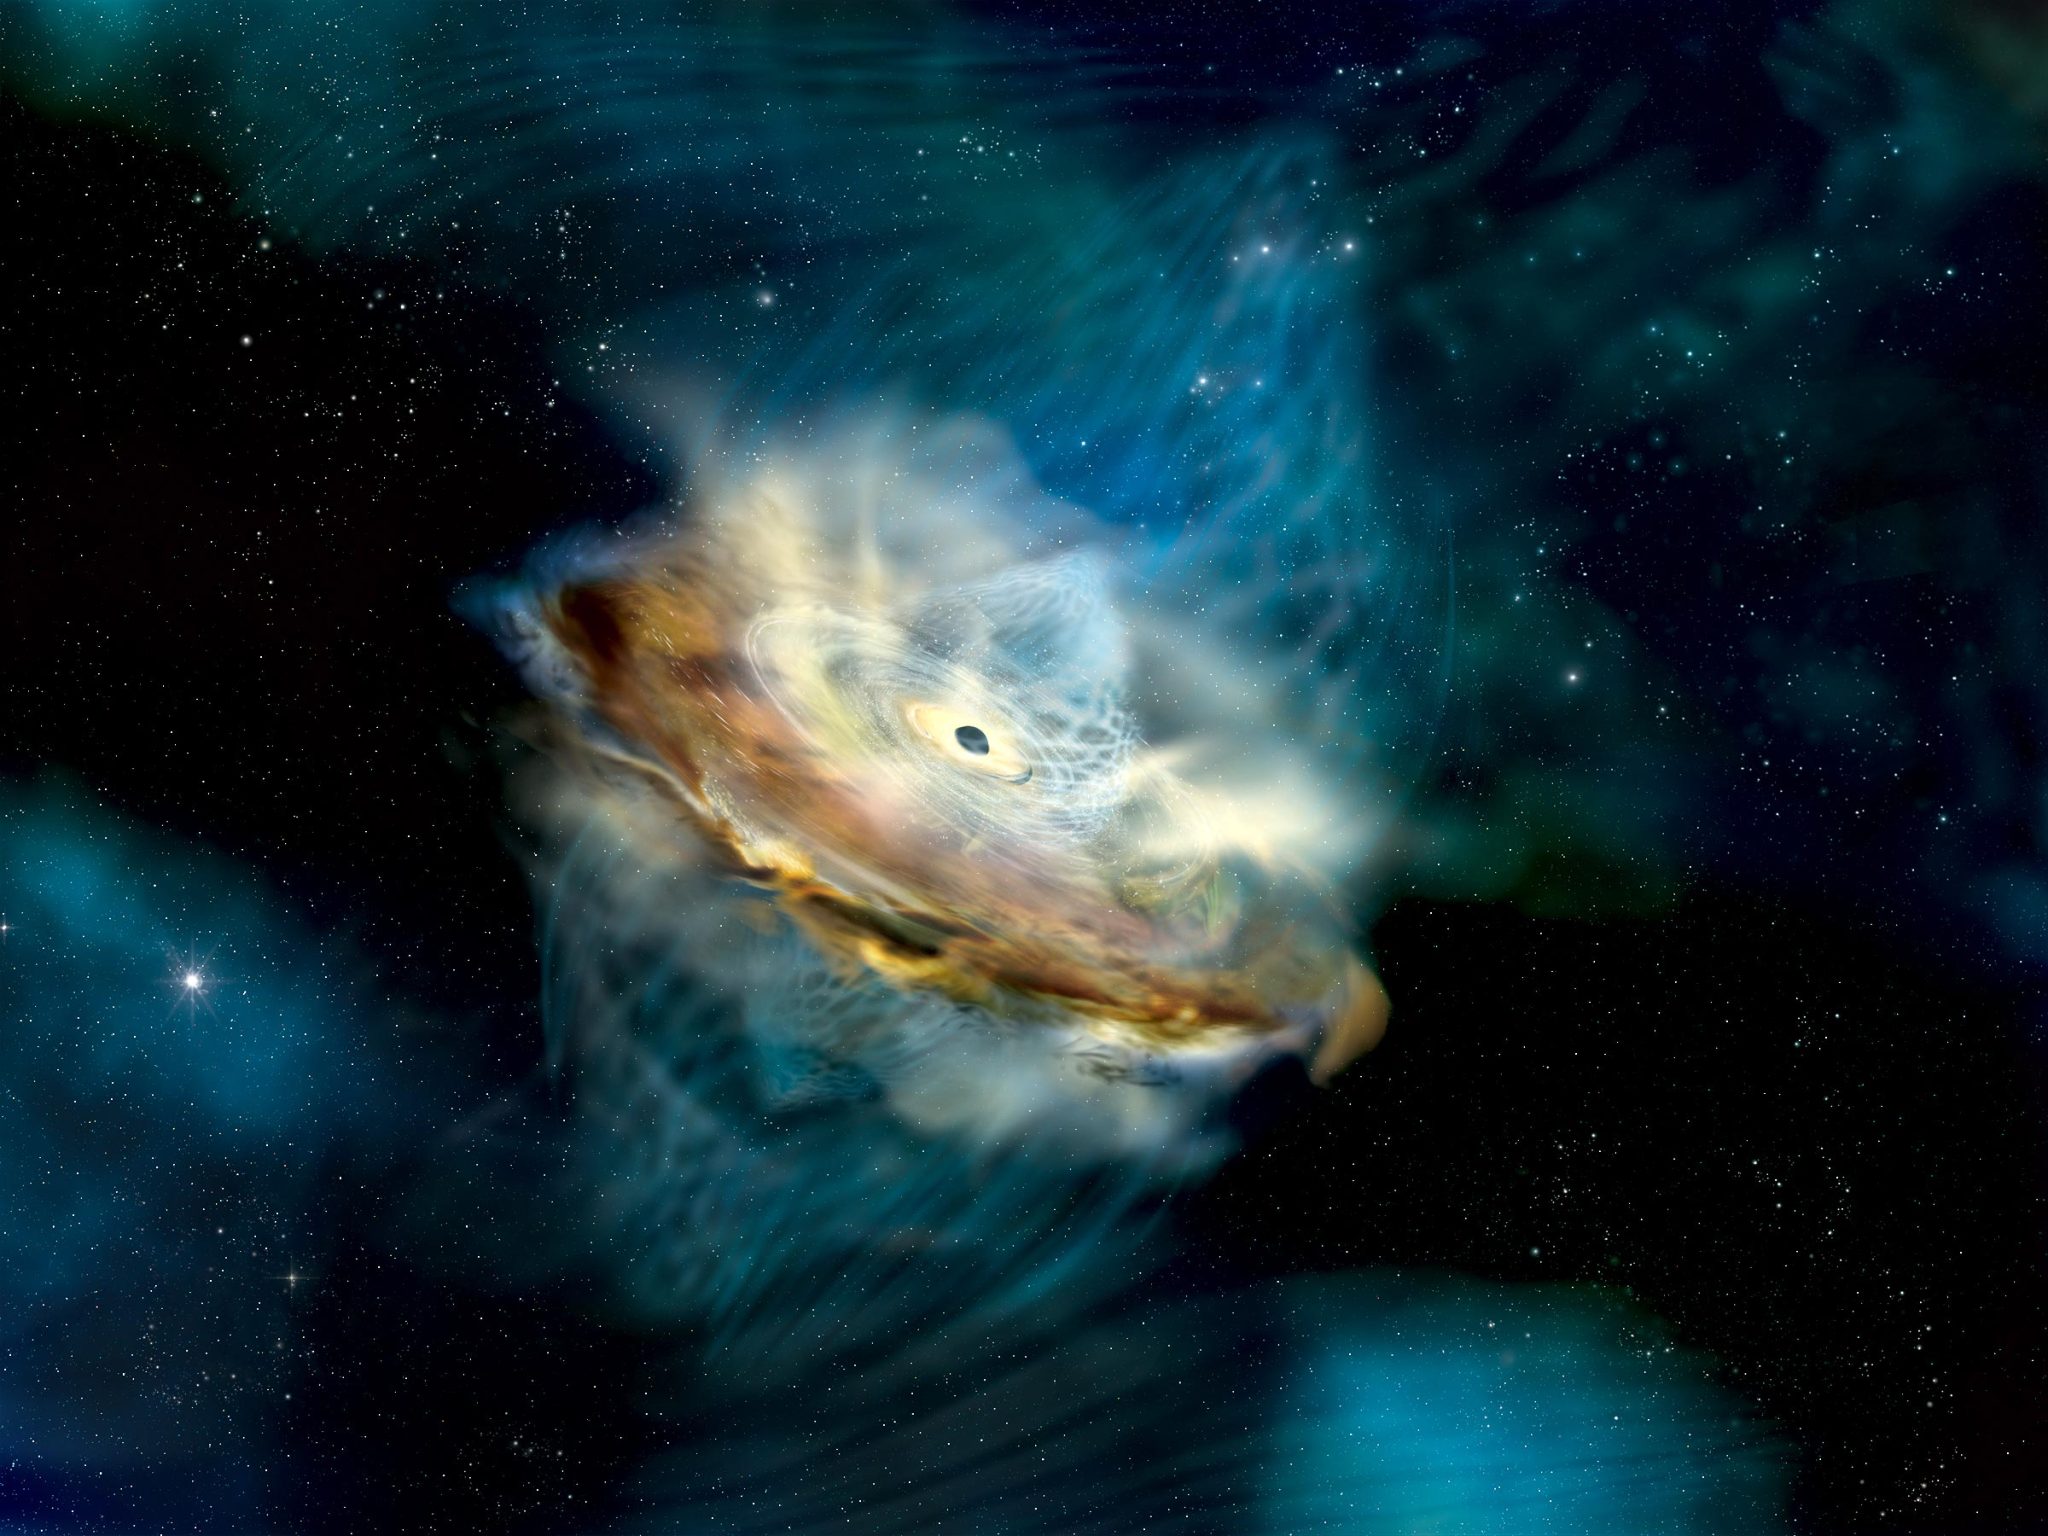 An accretion disk, a corona, and a supermassive black hole in an active galaxy